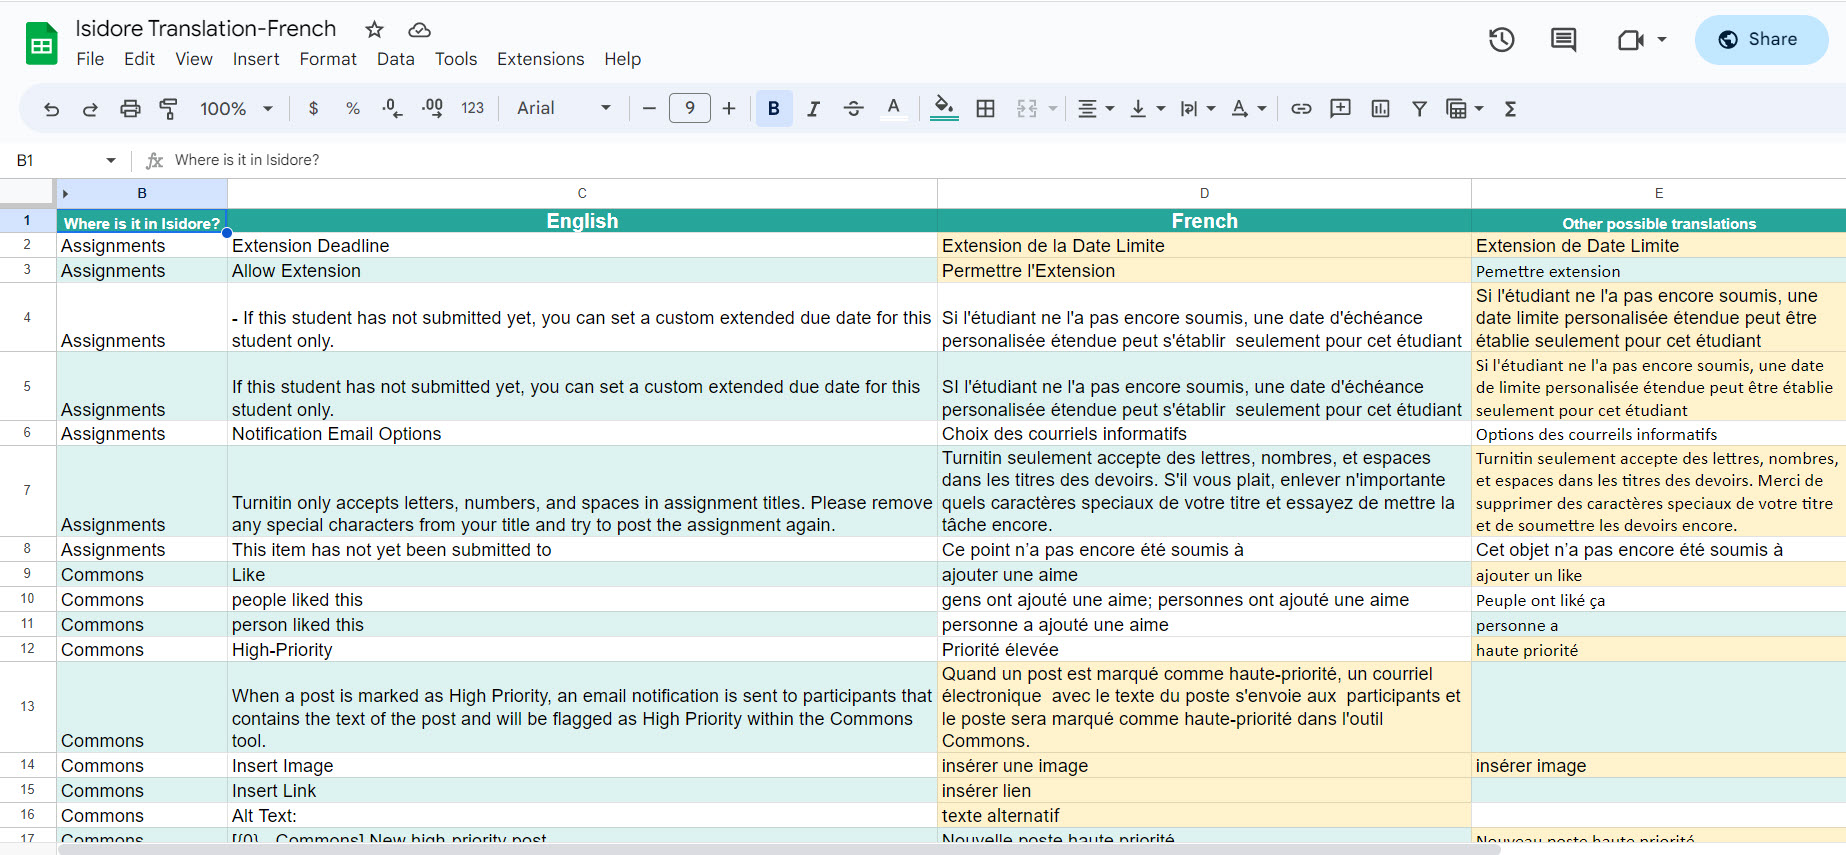 The Google Sheets French translation document has columns for English text, French text, and the language bundle's location in Isidore.